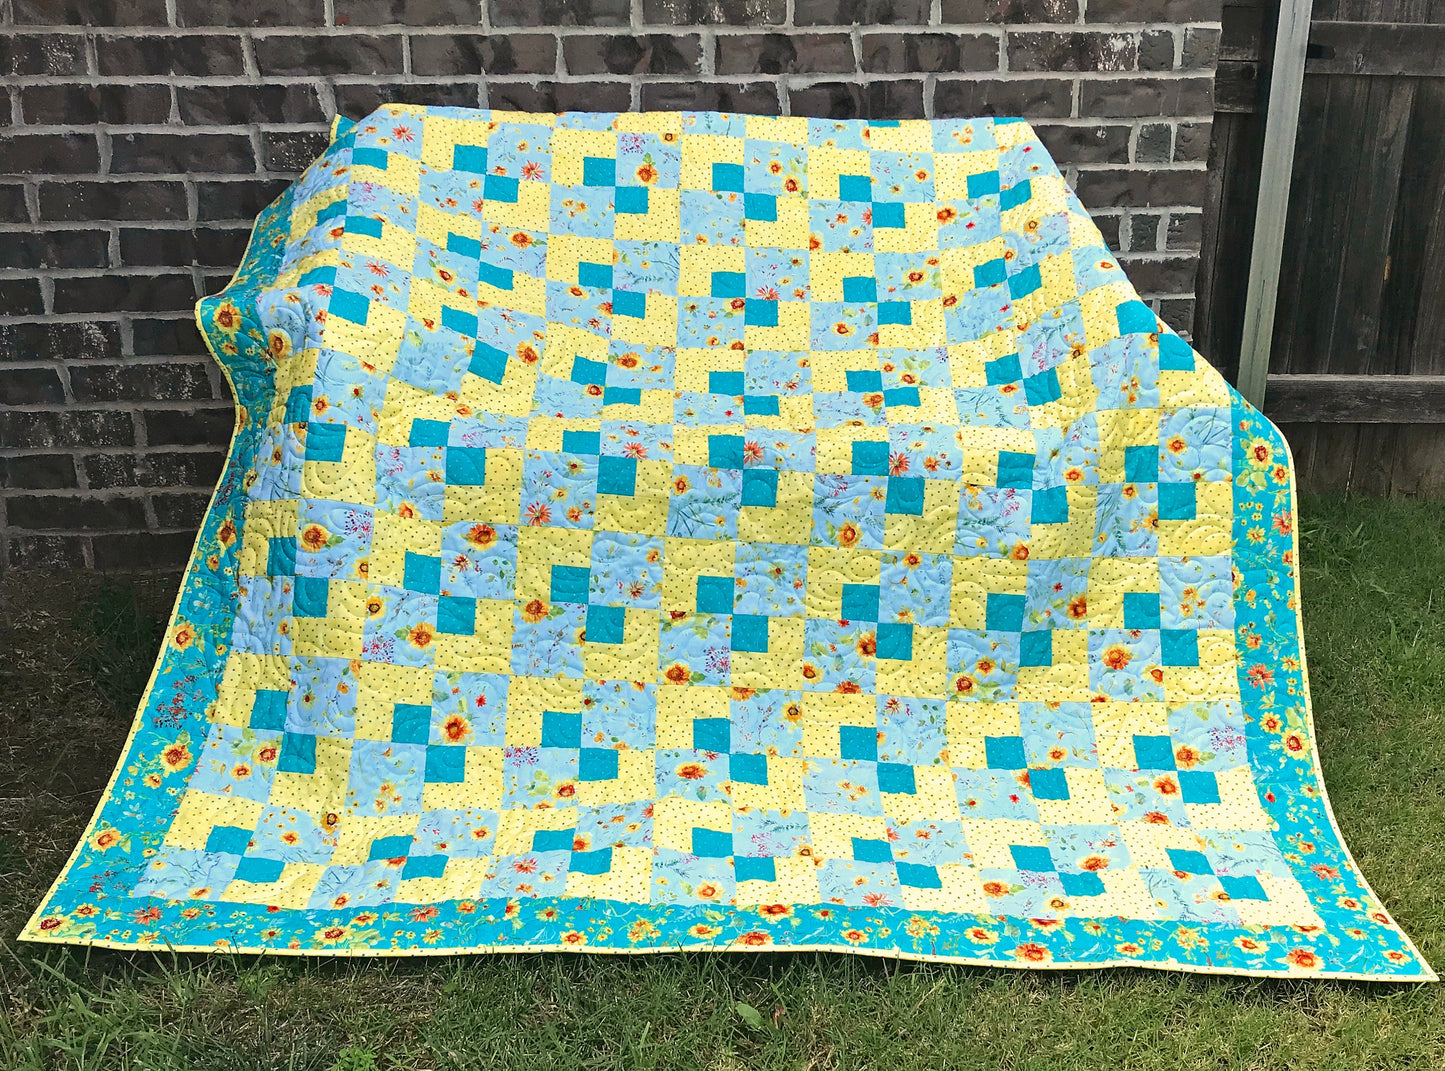 Cornerstones quilt pattern sample quilt. Four patch quilt in yellow and teal floral fabrics displayed on a bench.